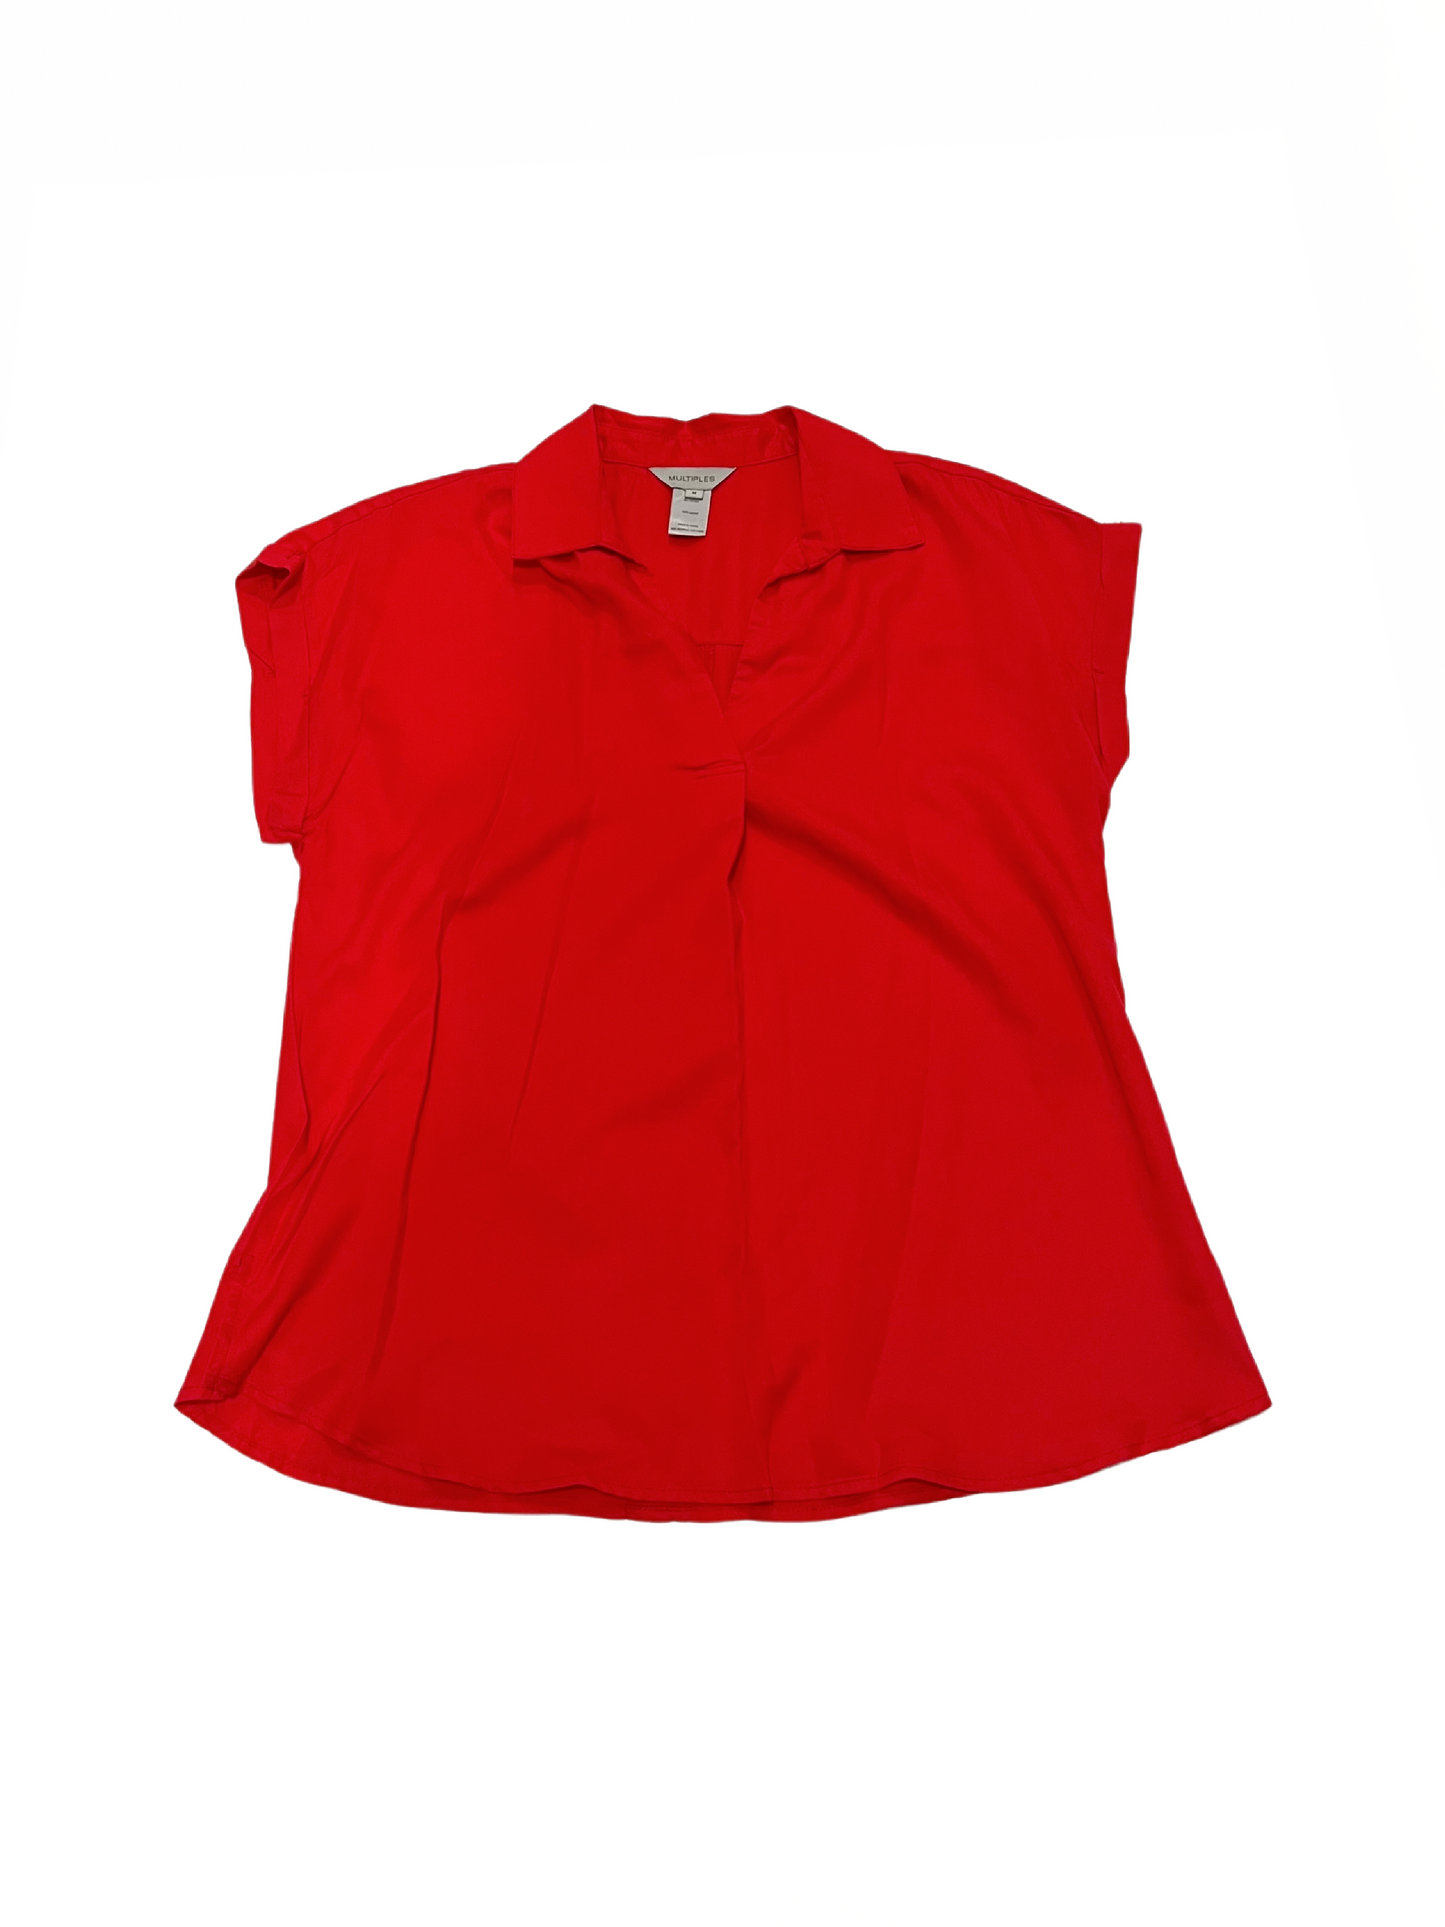 Rolled S/S Dolman Tuck Top Red